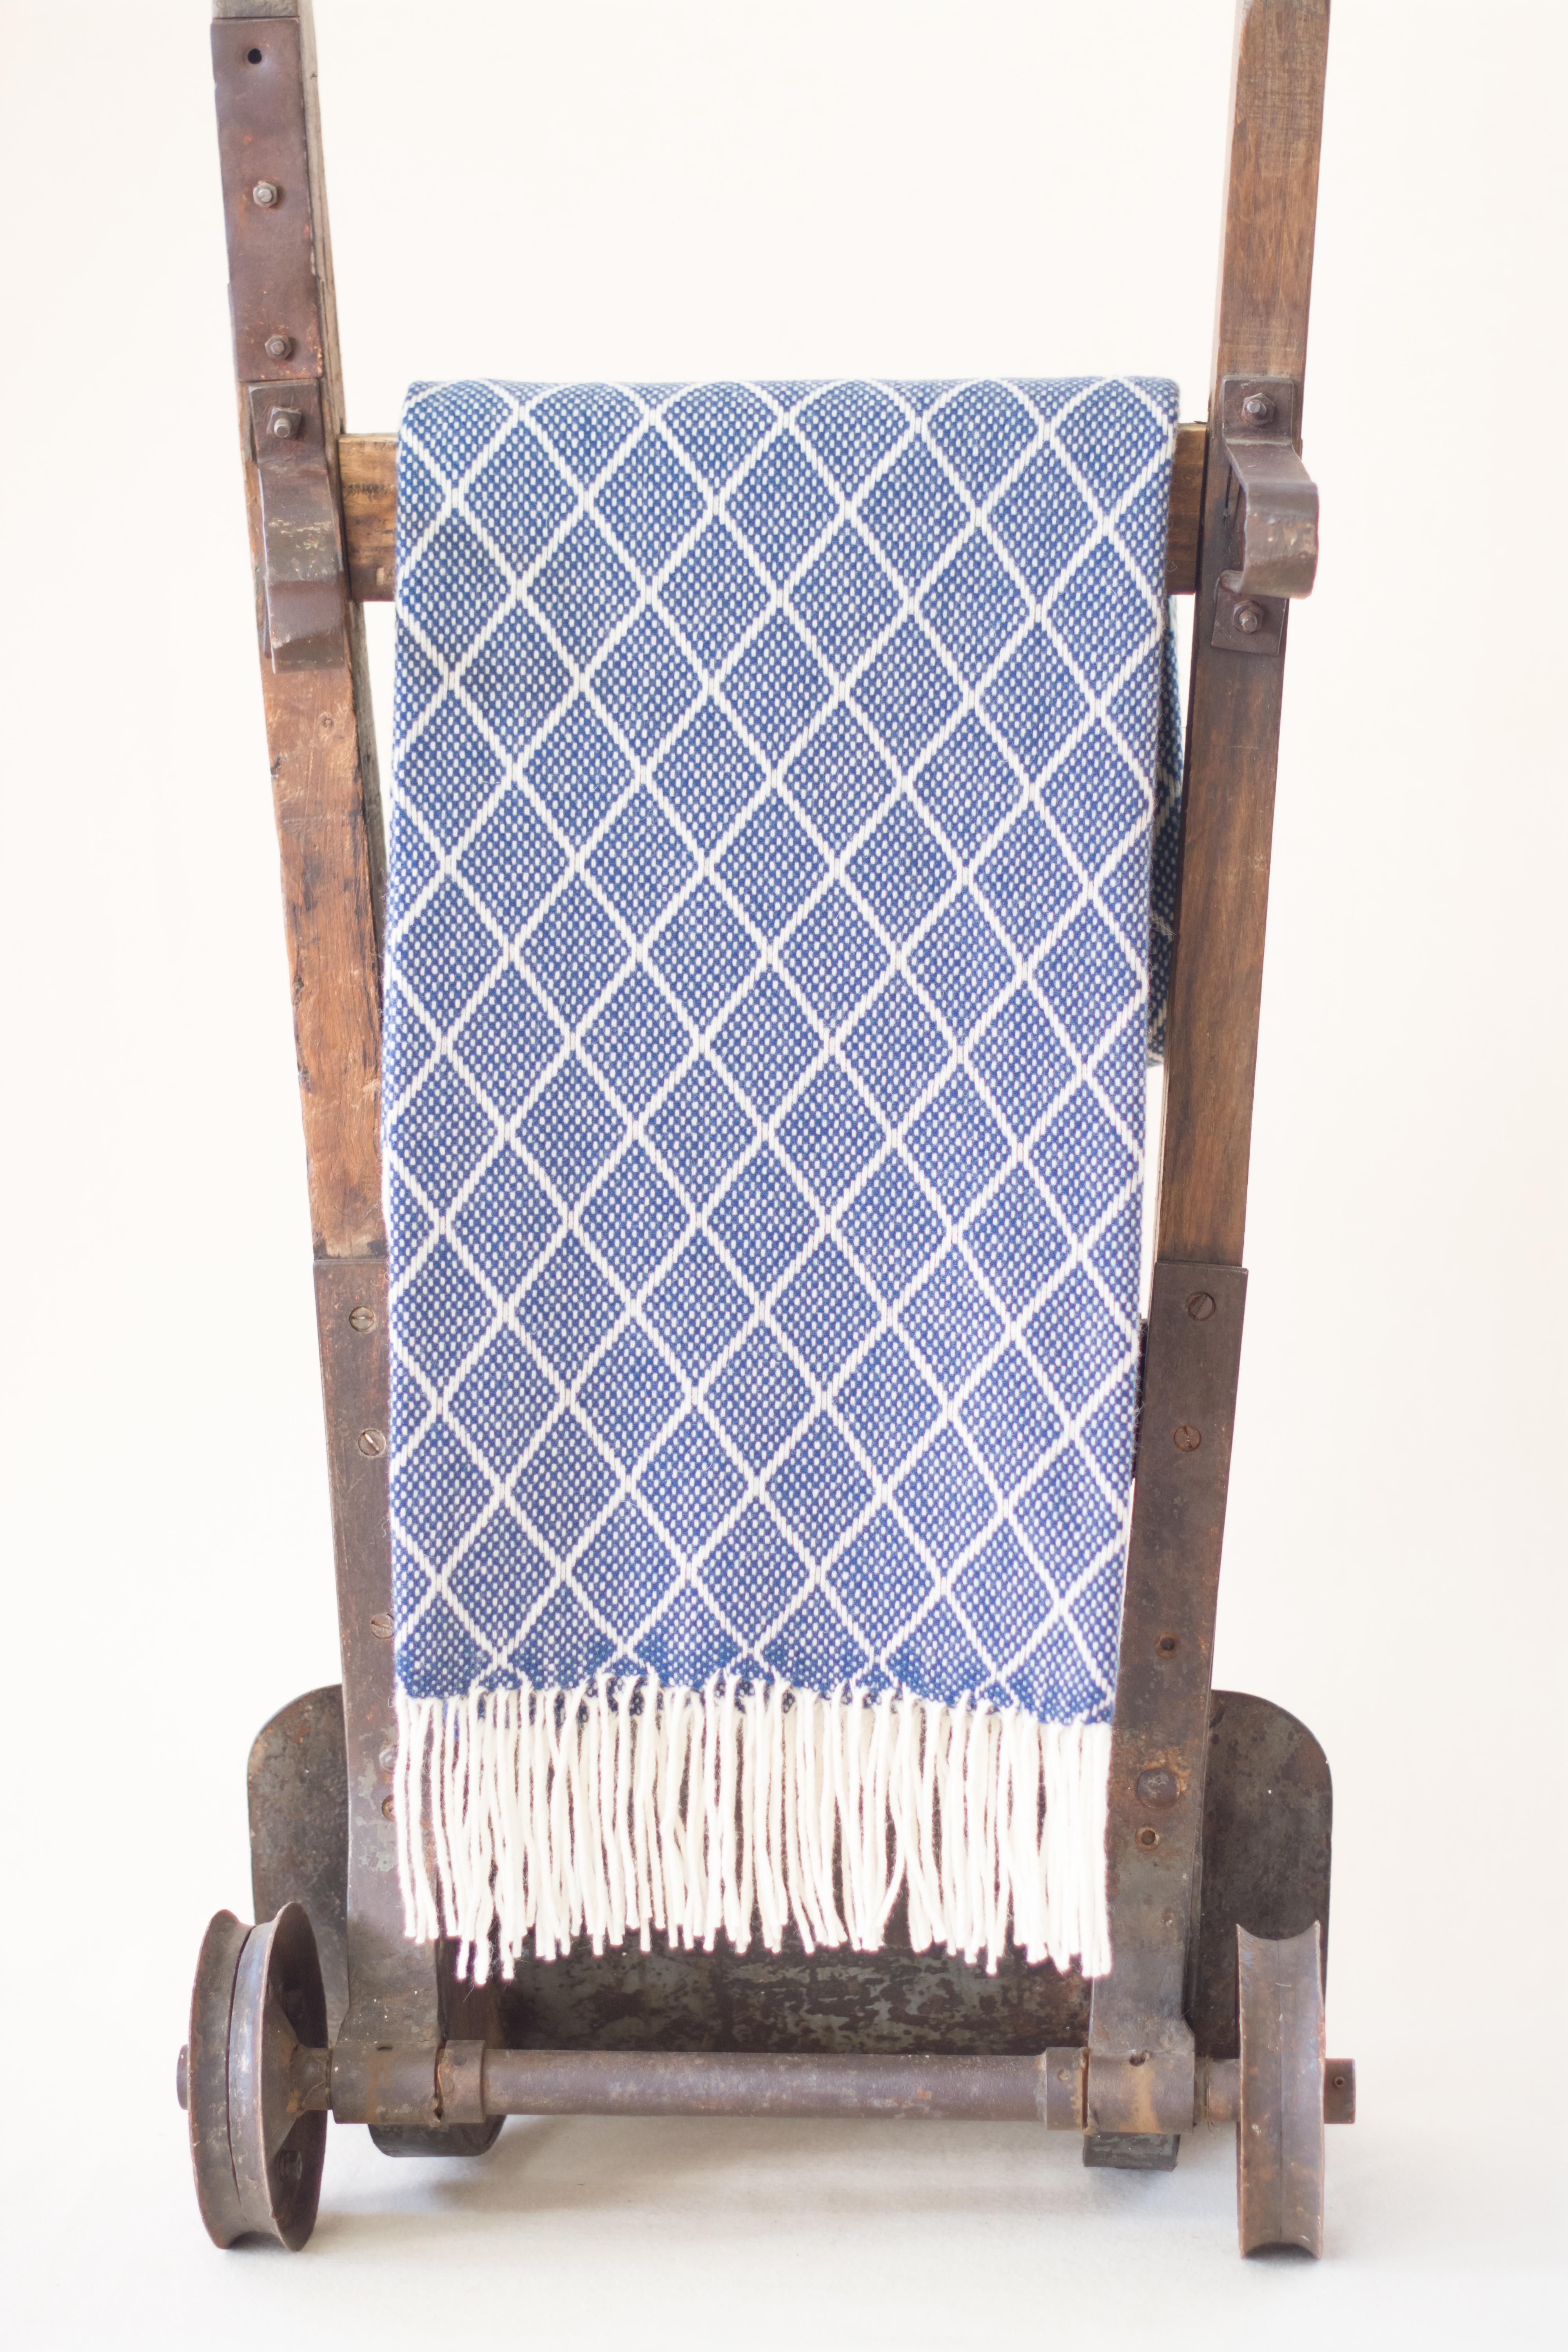 The Otilia Blue denim Diamond pattern blanket/throw has been created by an incredible and unique family owned weaving and textile company in Portugal. This company impressed us so much by their commitment to working with the environment, their